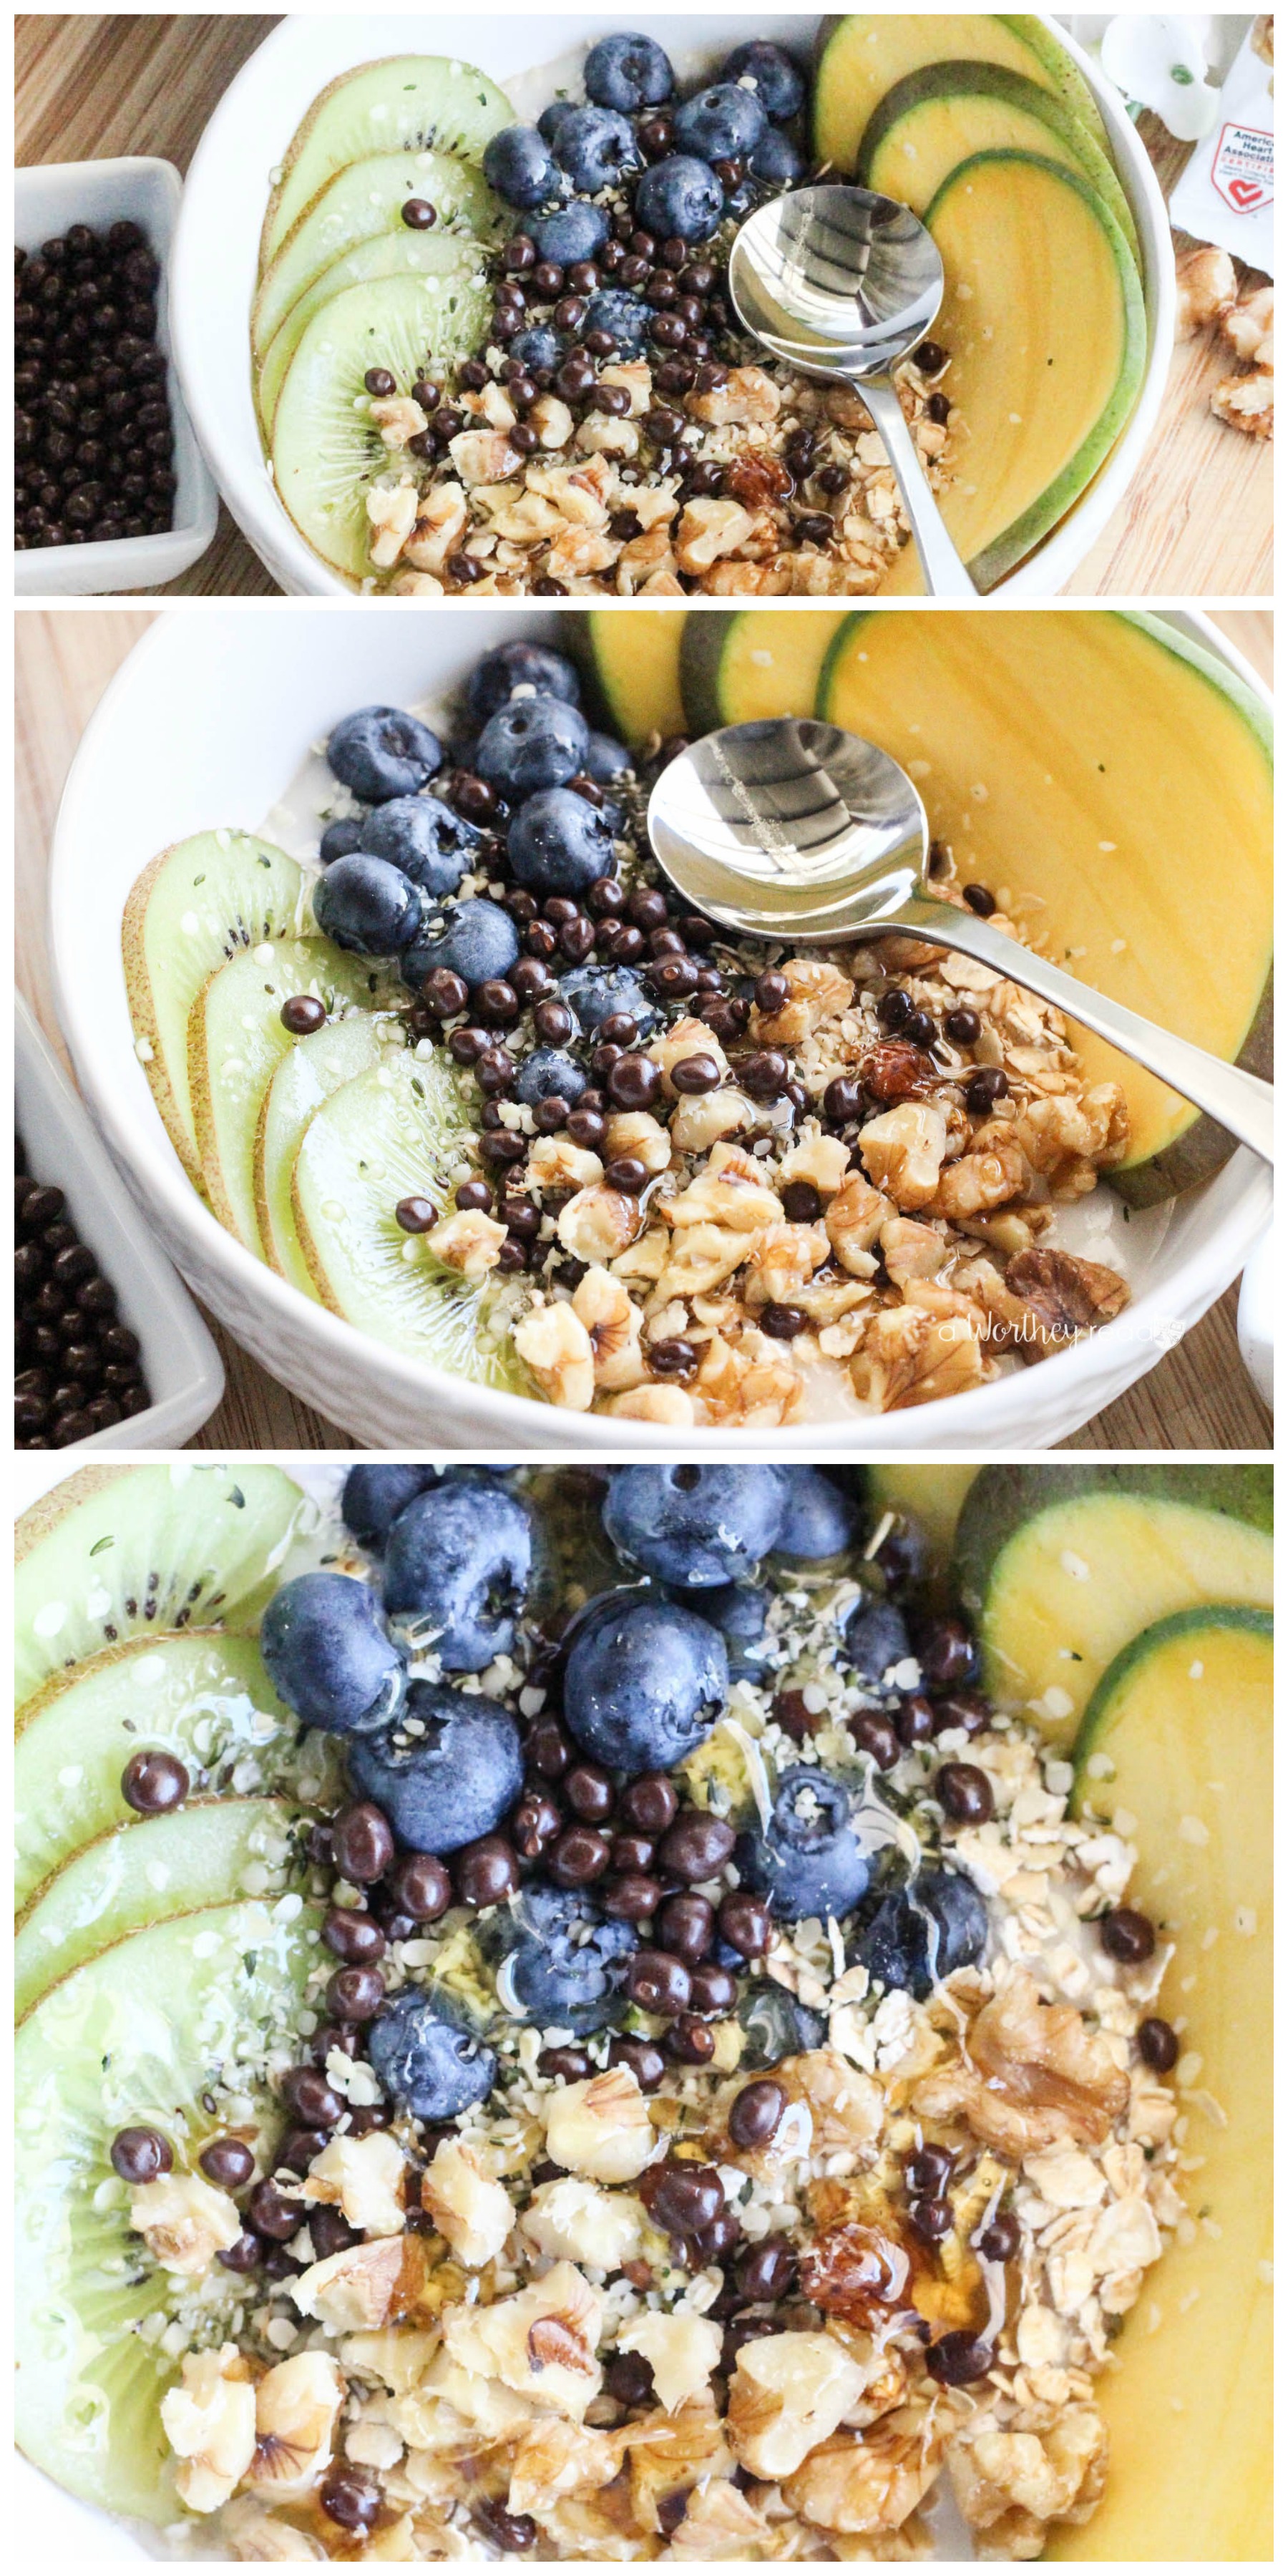 Here's an easy breakfast idea for the non-dairy fans. Smoothie bowls, yogurt bowls are quite popular these days, and this Kiwi, Blueberry & Mango Non-Dairy Yogurt Bowl will soon become a favorite for breakfast. It combines several fruits (Kiwi, Blueberries, and Mango) and necessary essentials (Hemp Hearts, California Walnuts, Vegan Oatmeal) to start your day off on the right foot! 